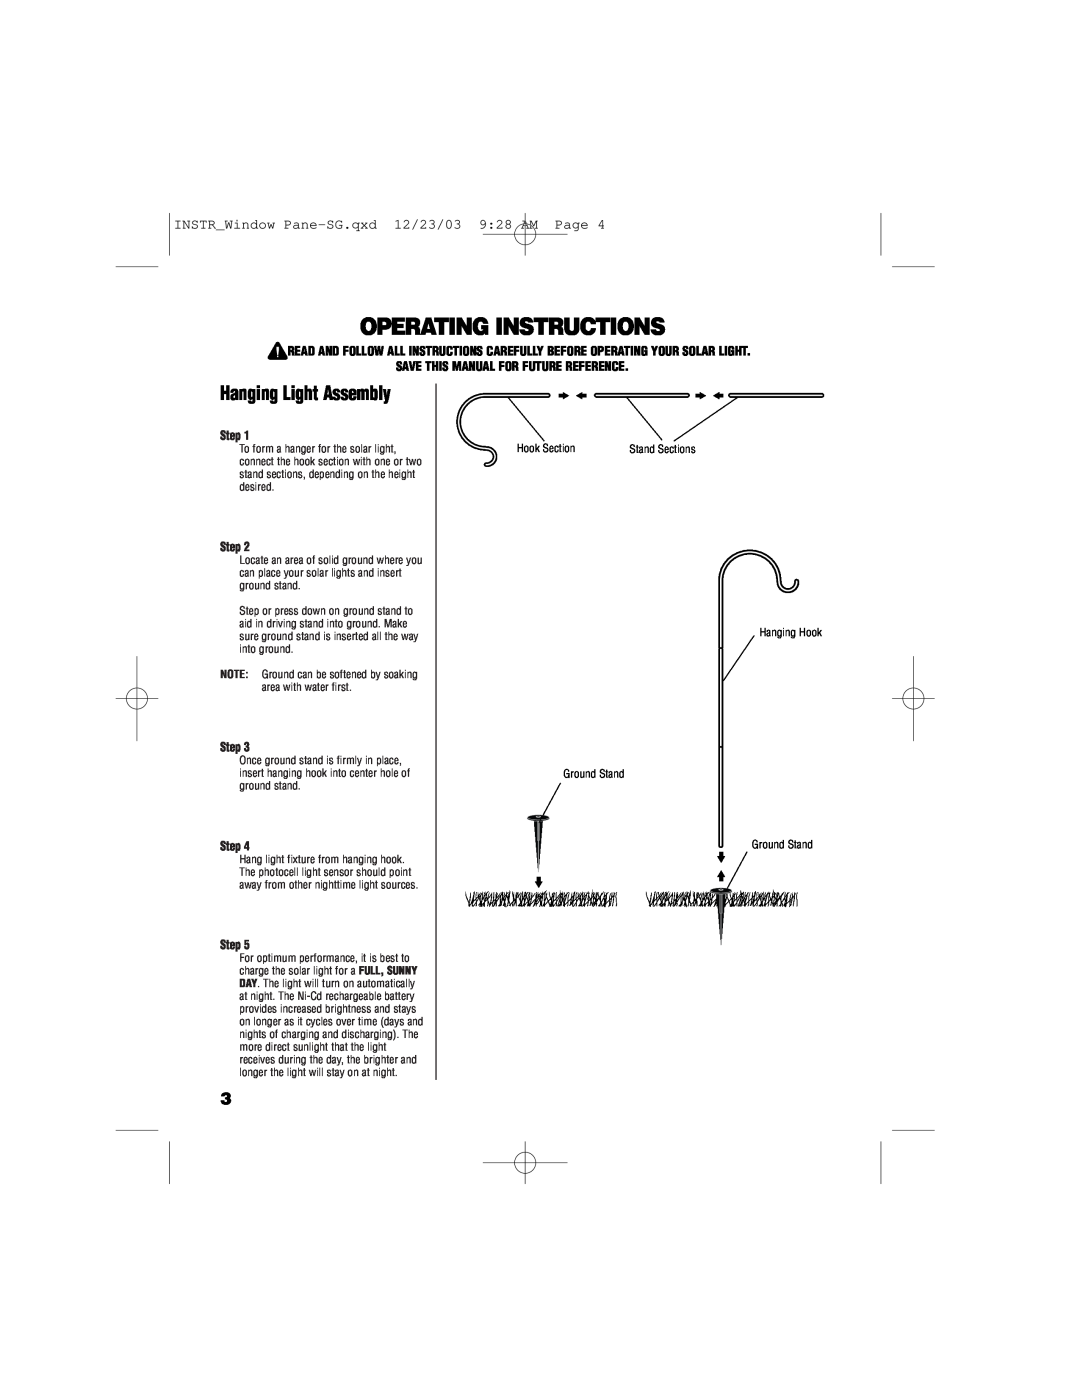 Brinkmann 822-2509-2 Operating Instructions, Hanging Light Assembly, Step, INSTRWindow Pane-SG.qxd 12/23/03 928 AM Page 